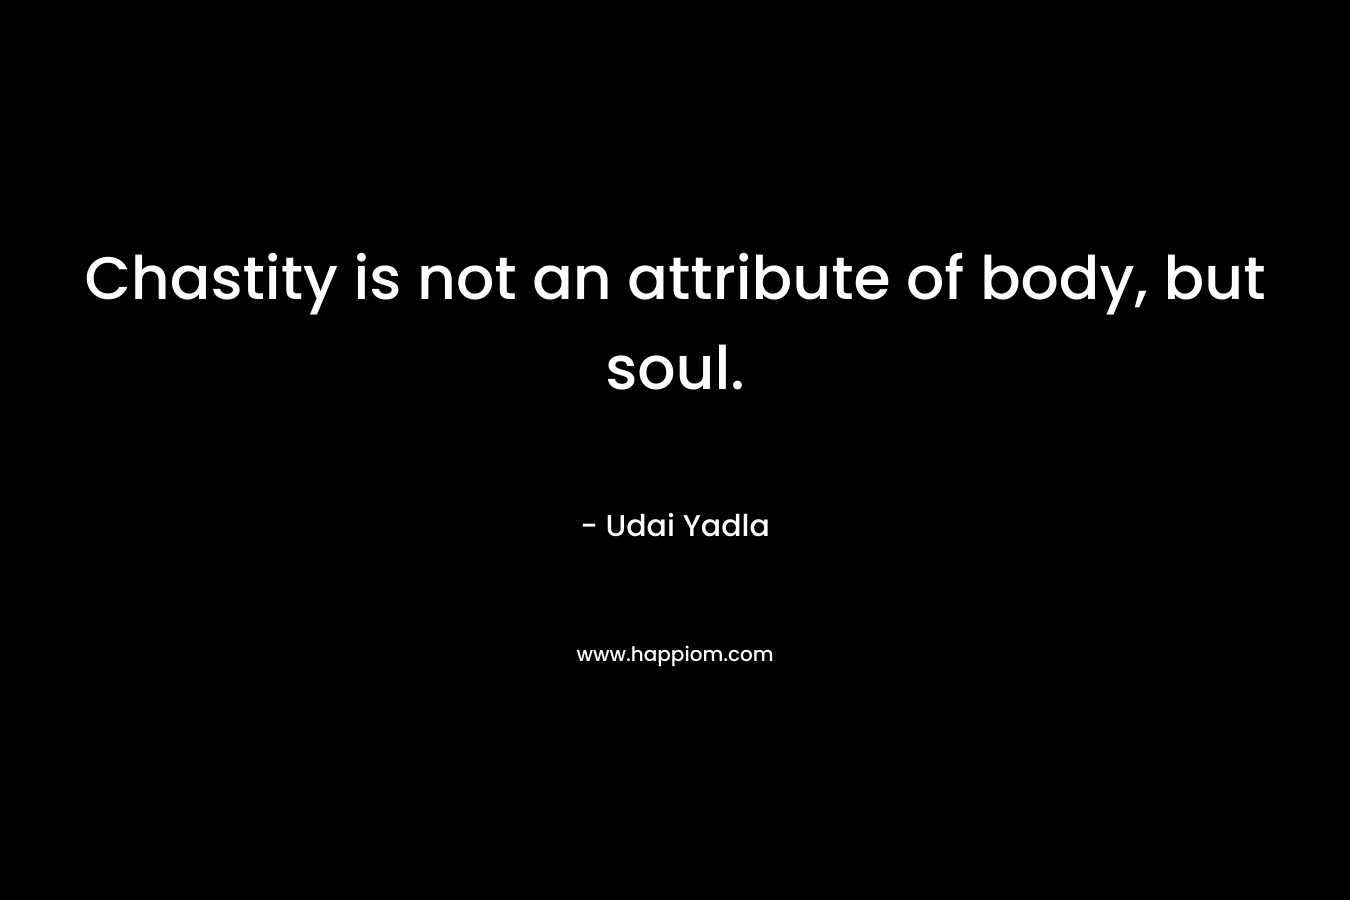 Chastity is not an attribute of body, but soul. – Udai Yadla